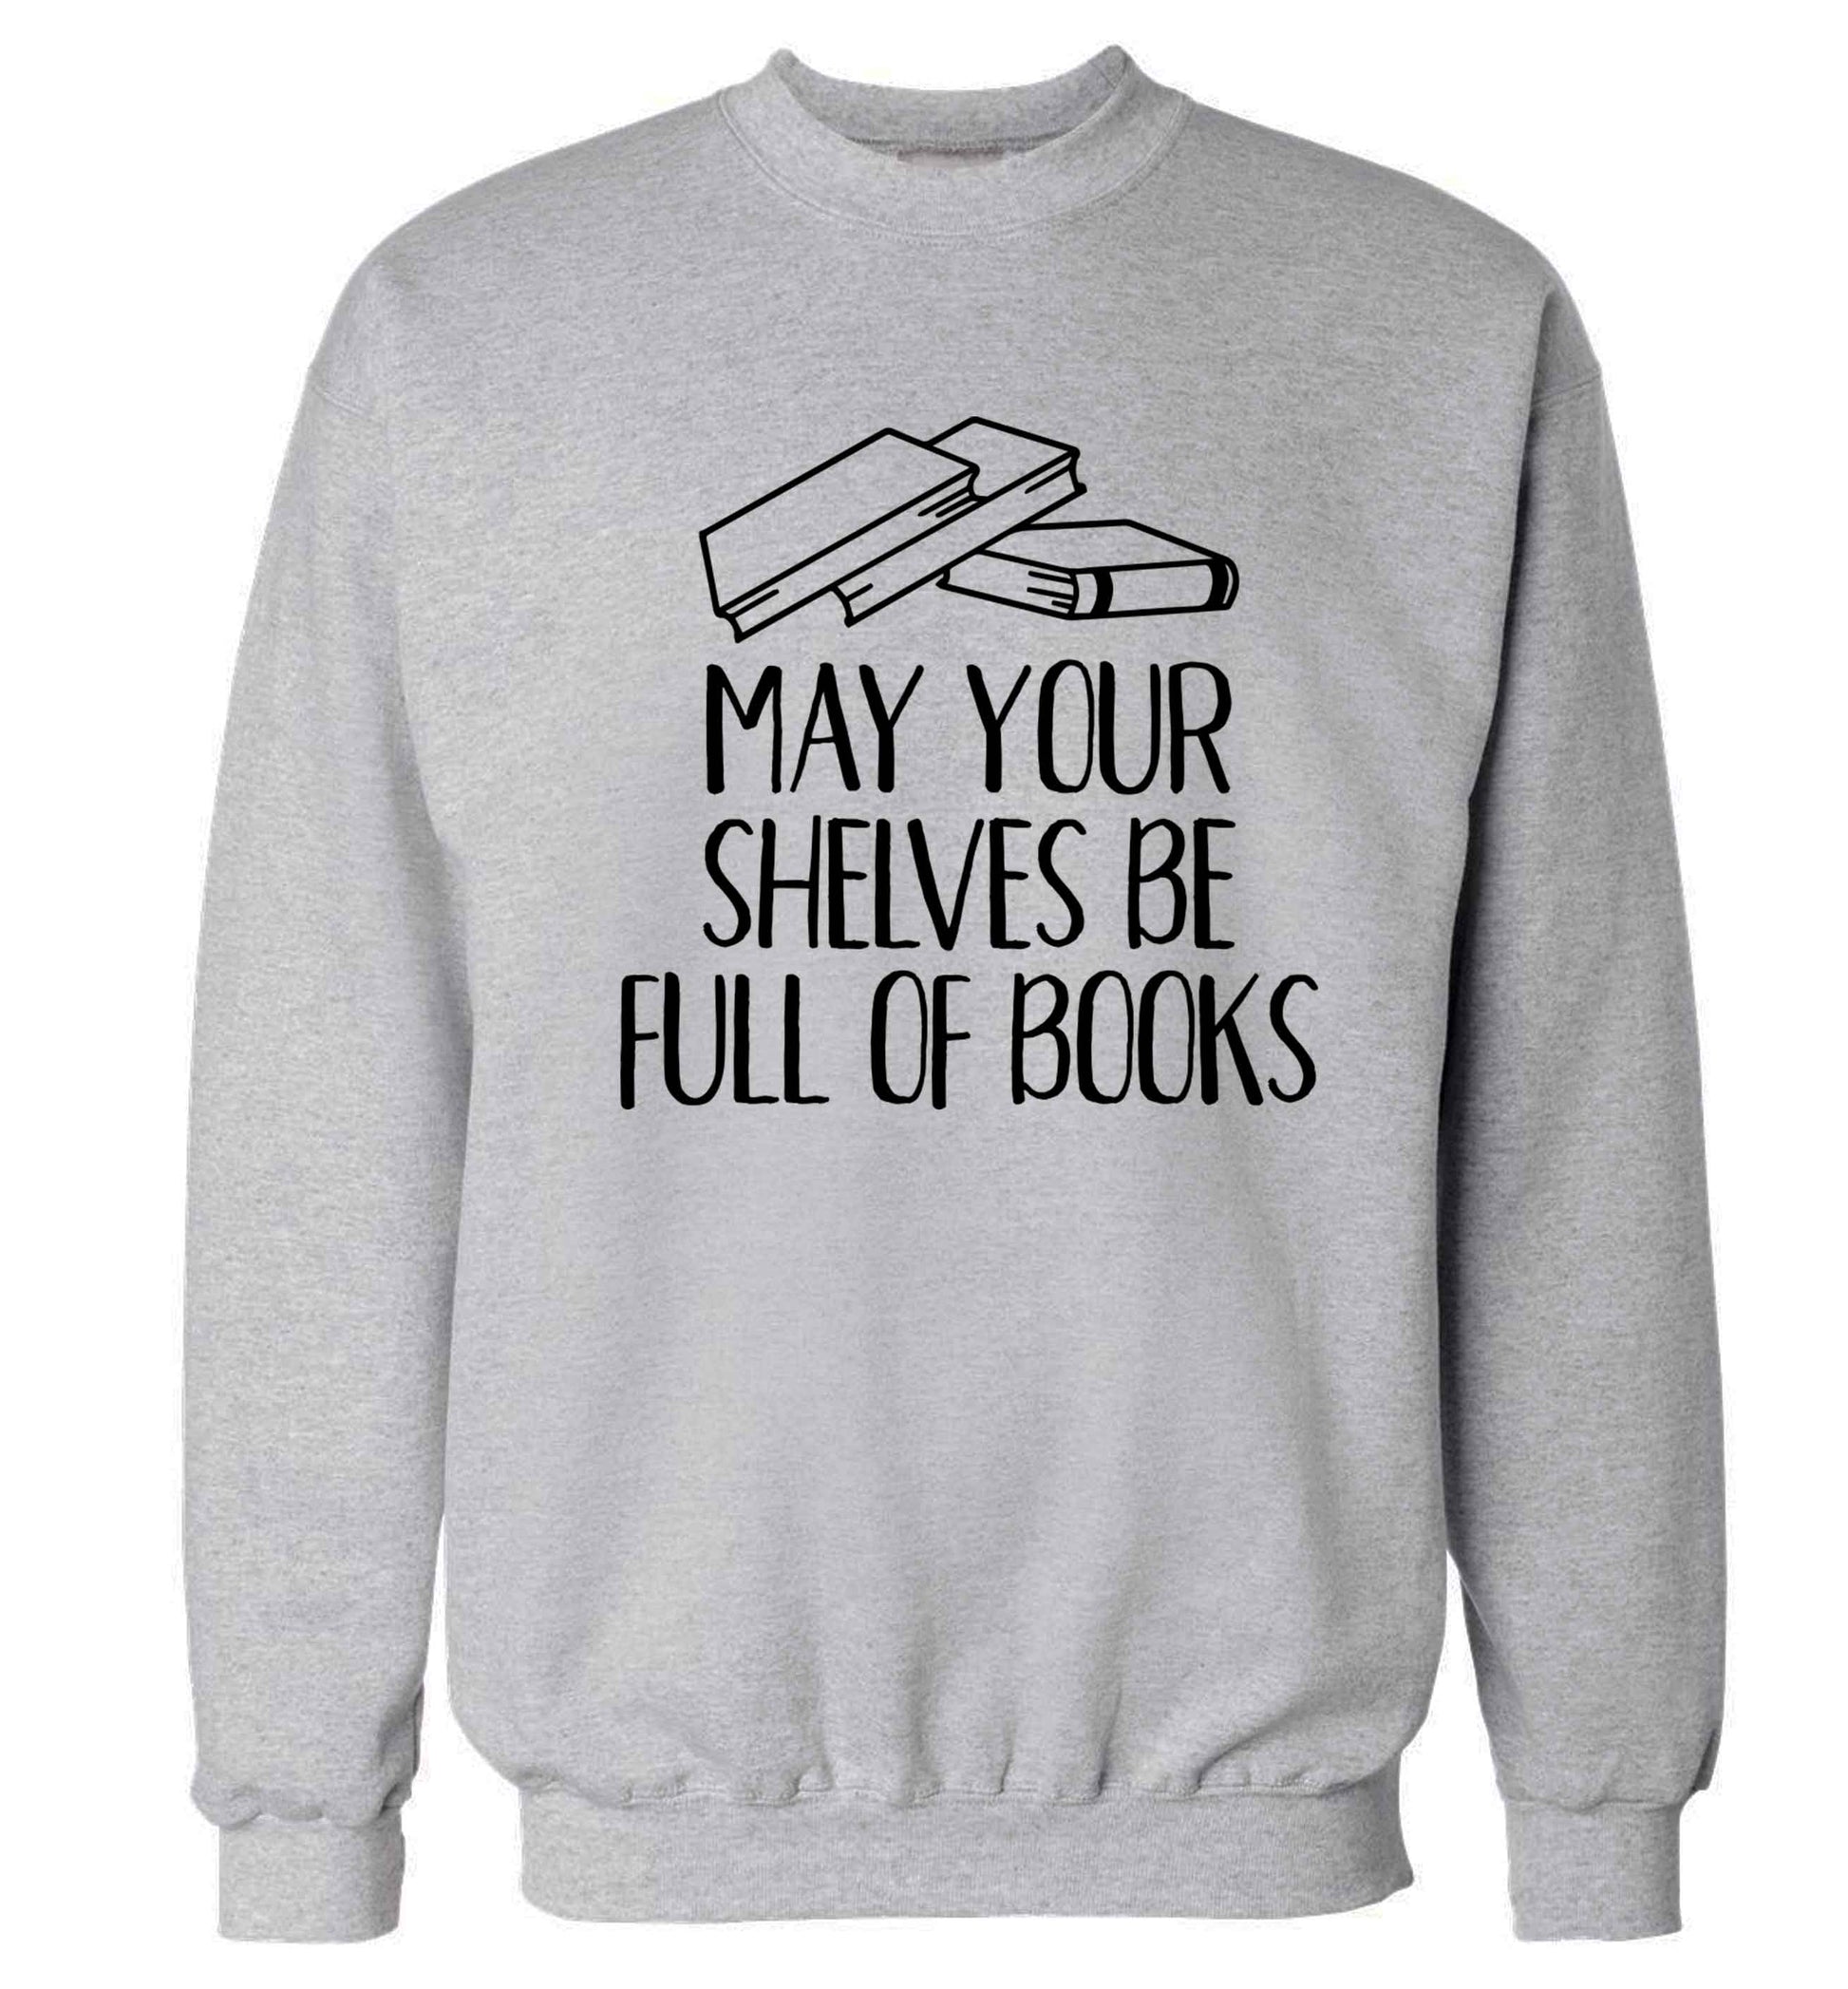 May your shelves be full of books Adult's unisex grey Sweater 2XL